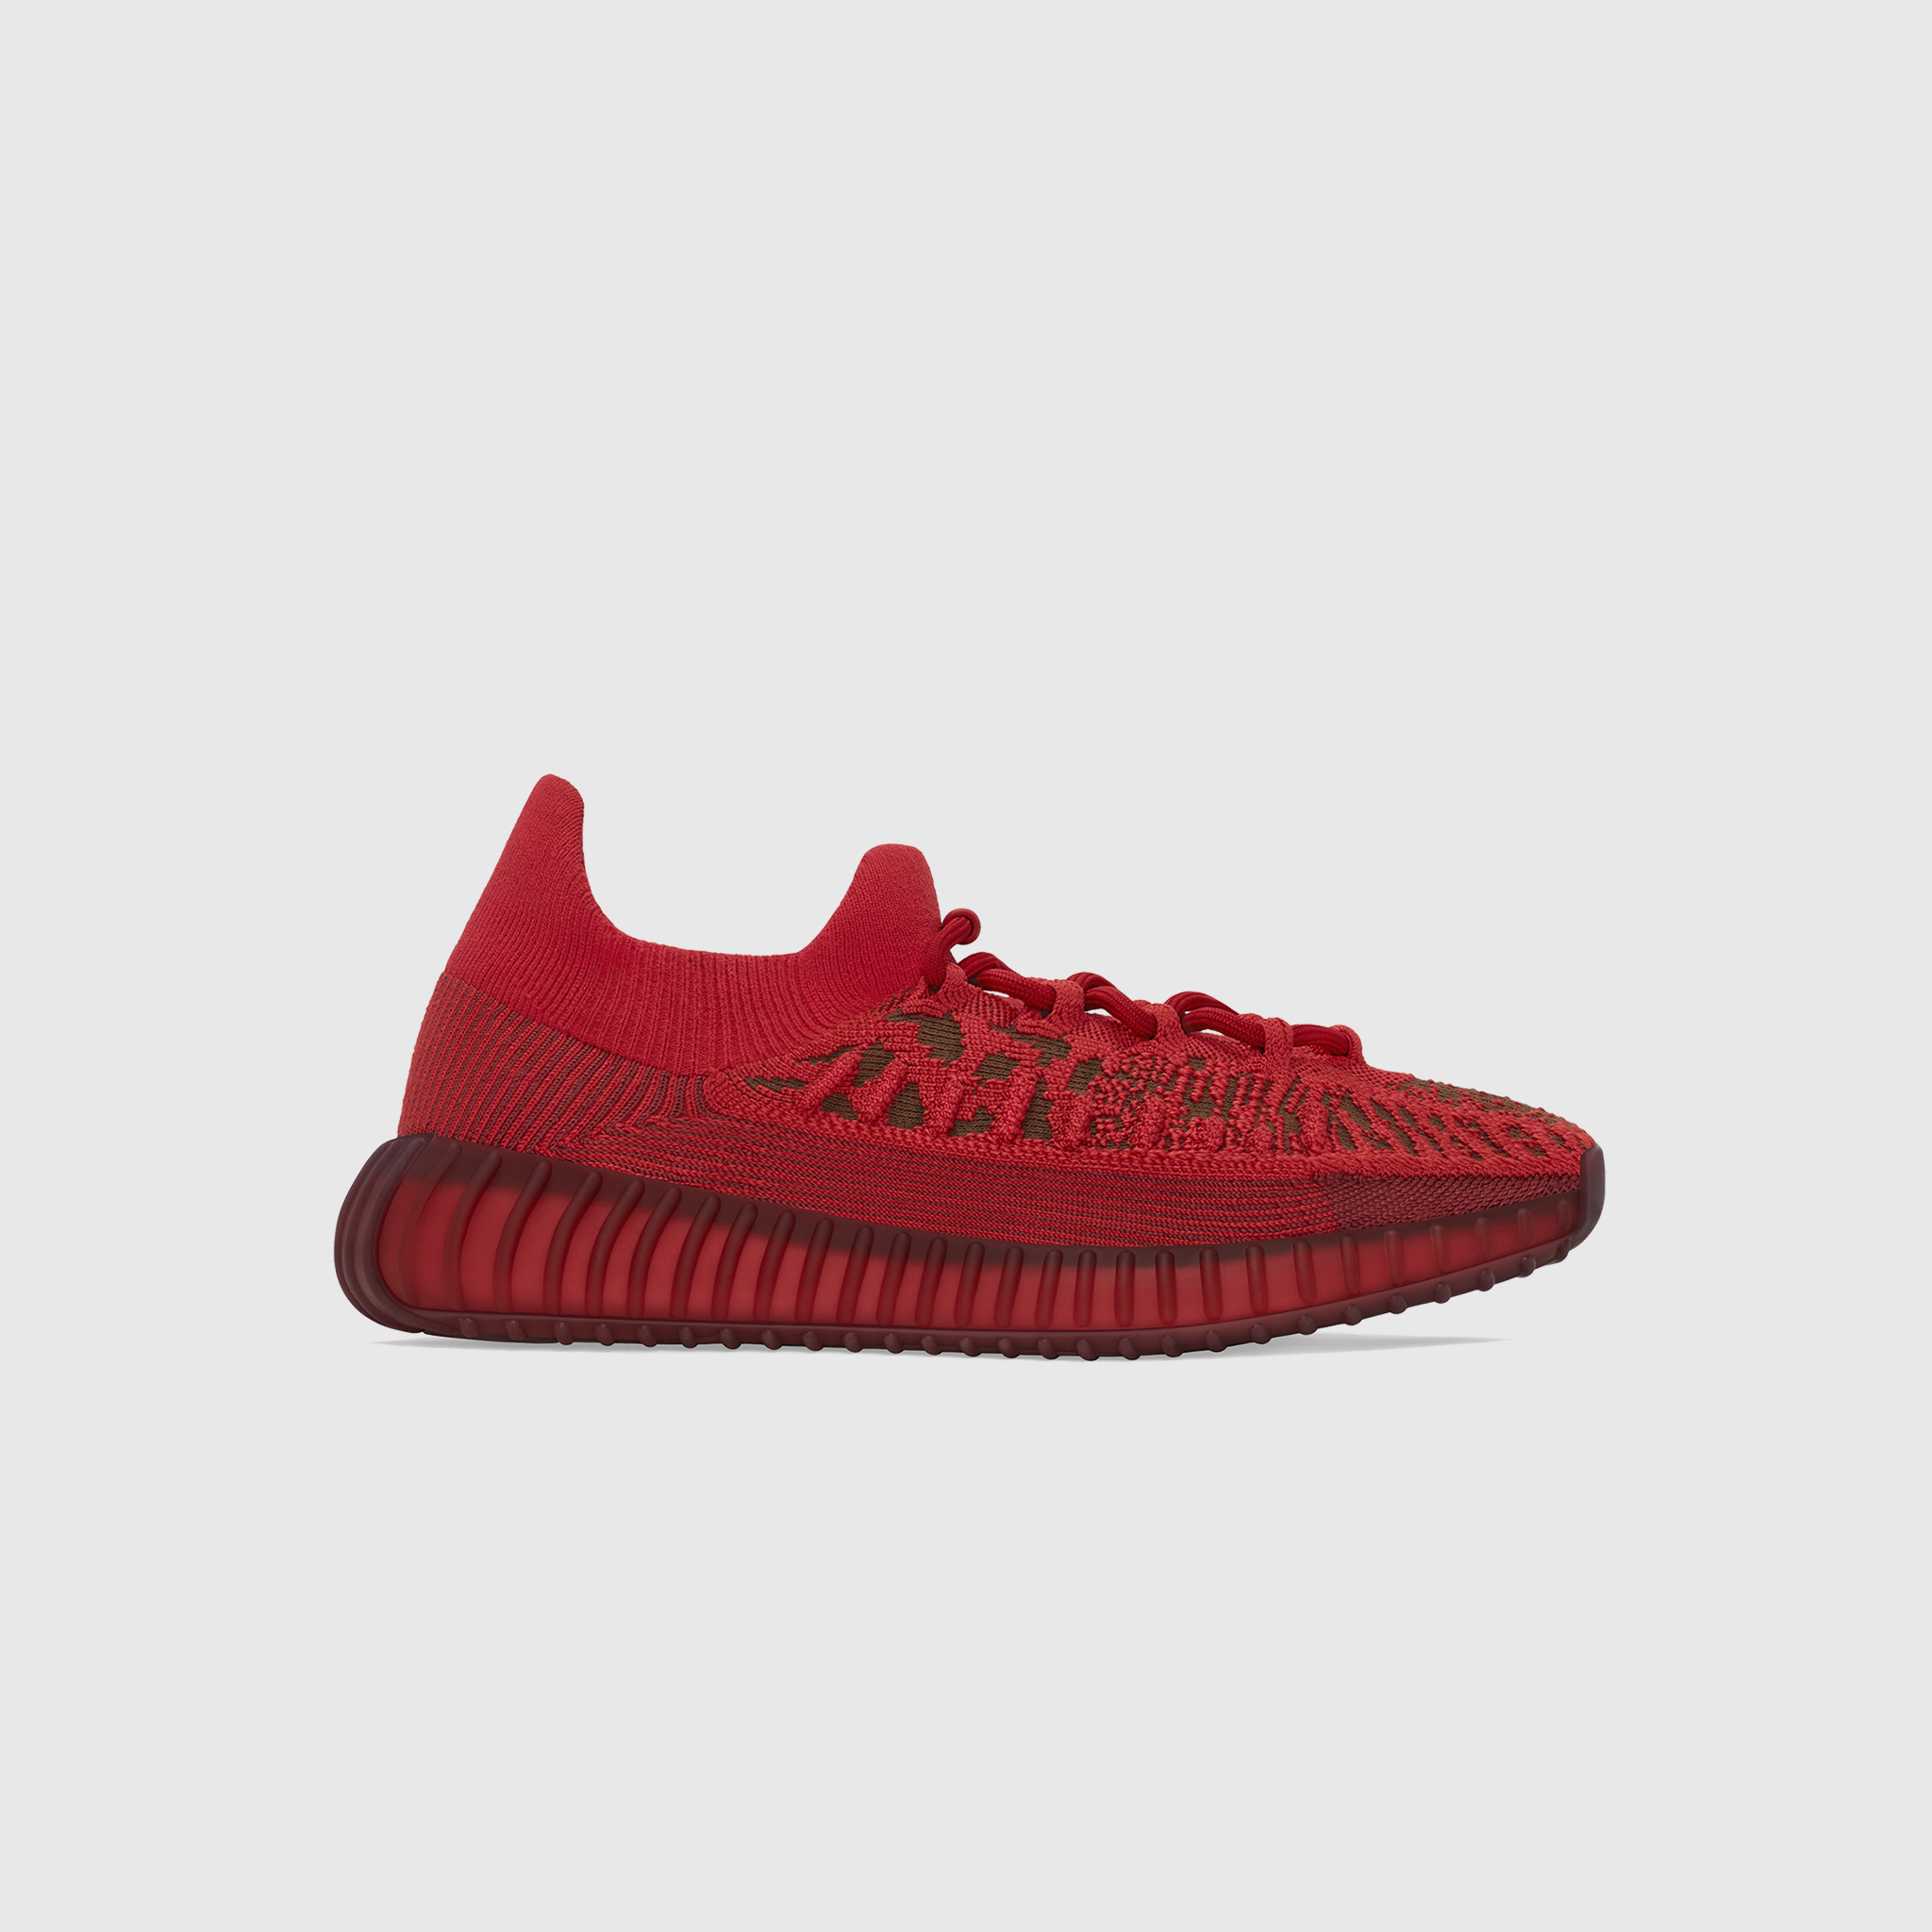 YEEZY 350 CMPCT "SLATE RED" – PACKER SHOES